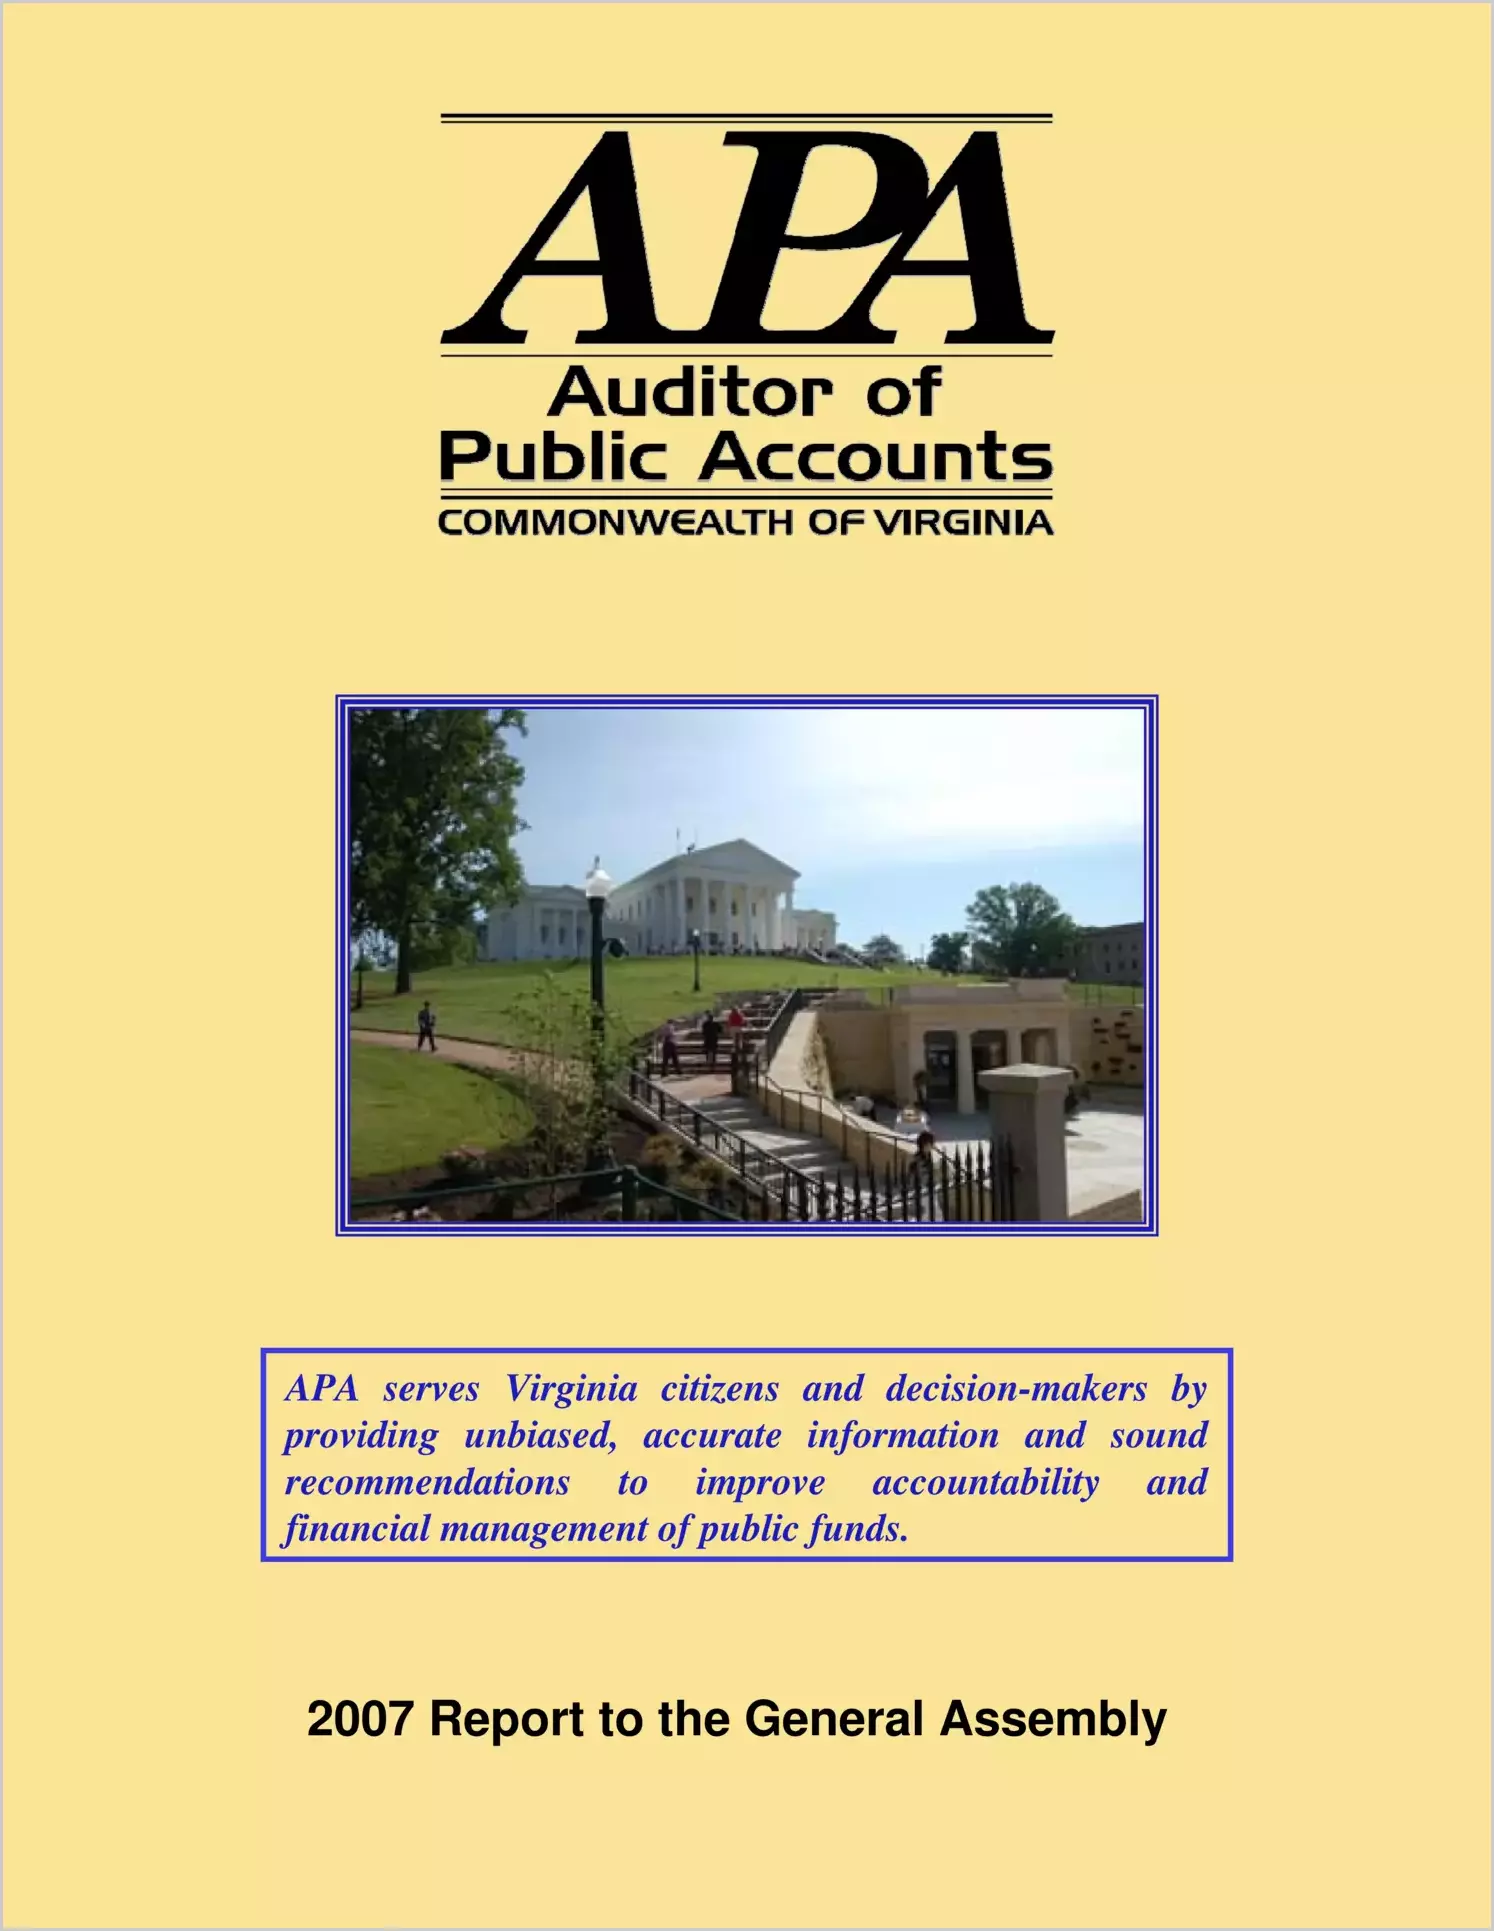 Auditor of Public Accounts Annual Report to the General Assembly for 2007